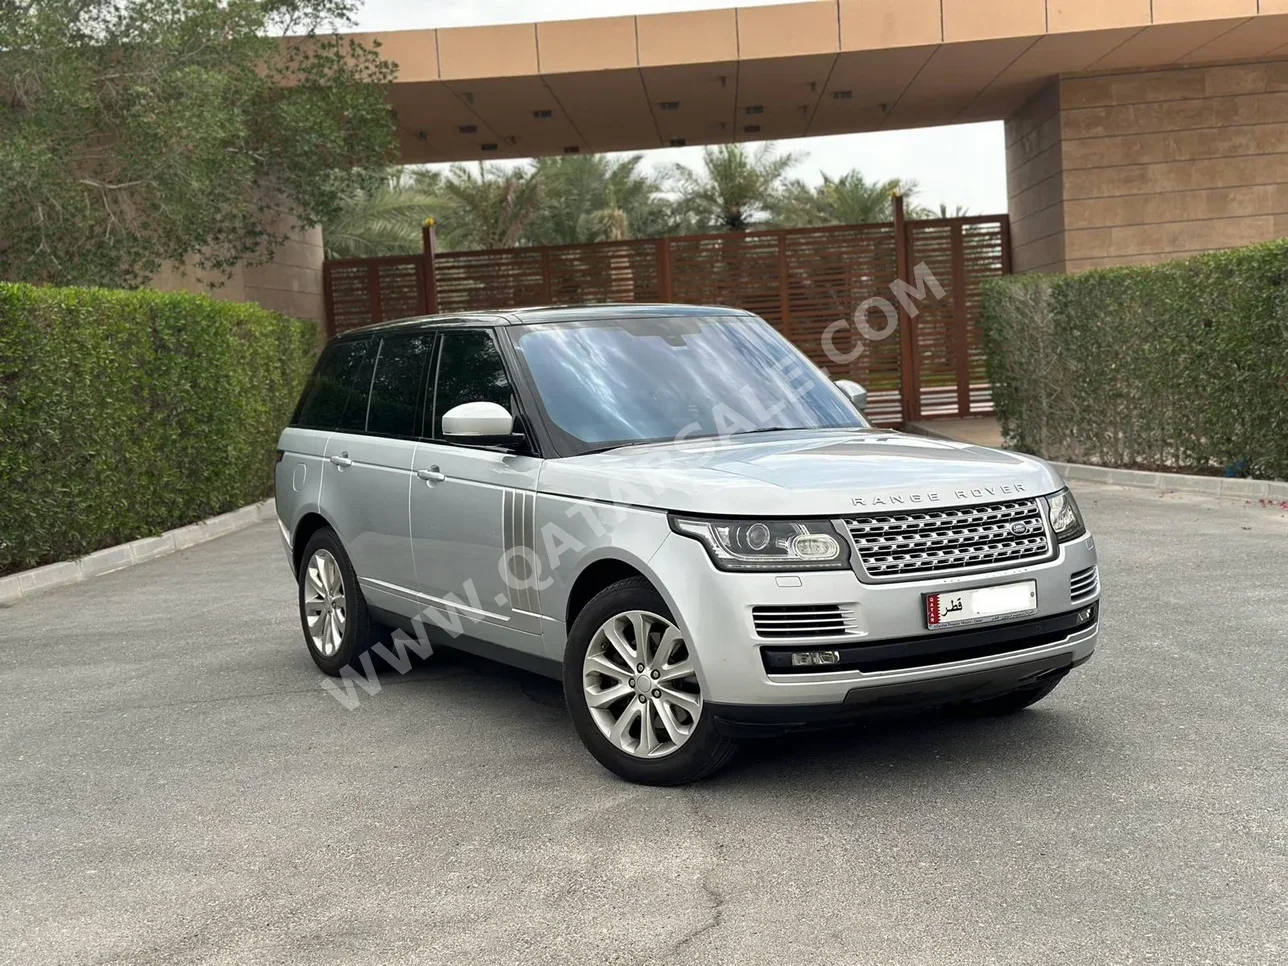 Land Rover  Range Rover  Vogue SE  2016  Automatic  182,000 Km  8 Cylinder  Four Wheel Drive (4WD)  SUV  Silver